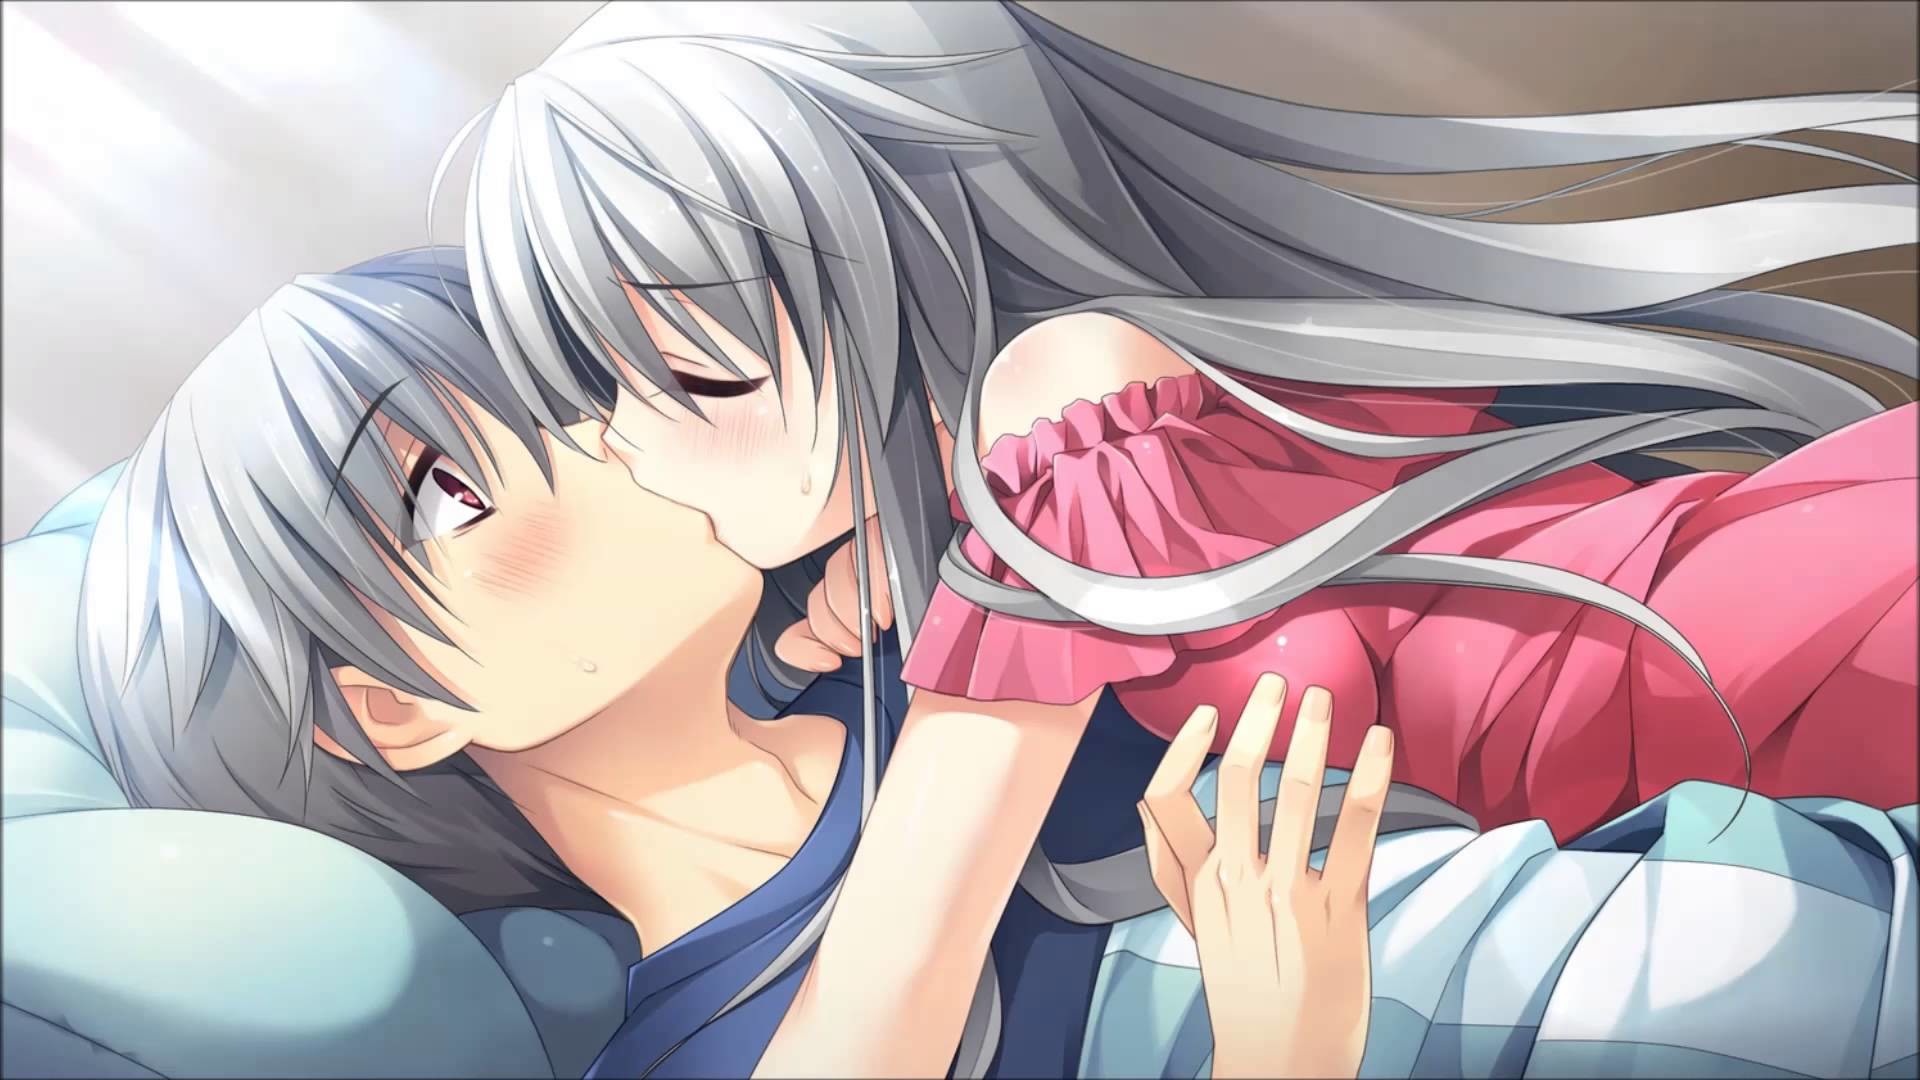 Boy Kissing Her Forehead - Cute Anime Couple Wallpaper Download | MobCup